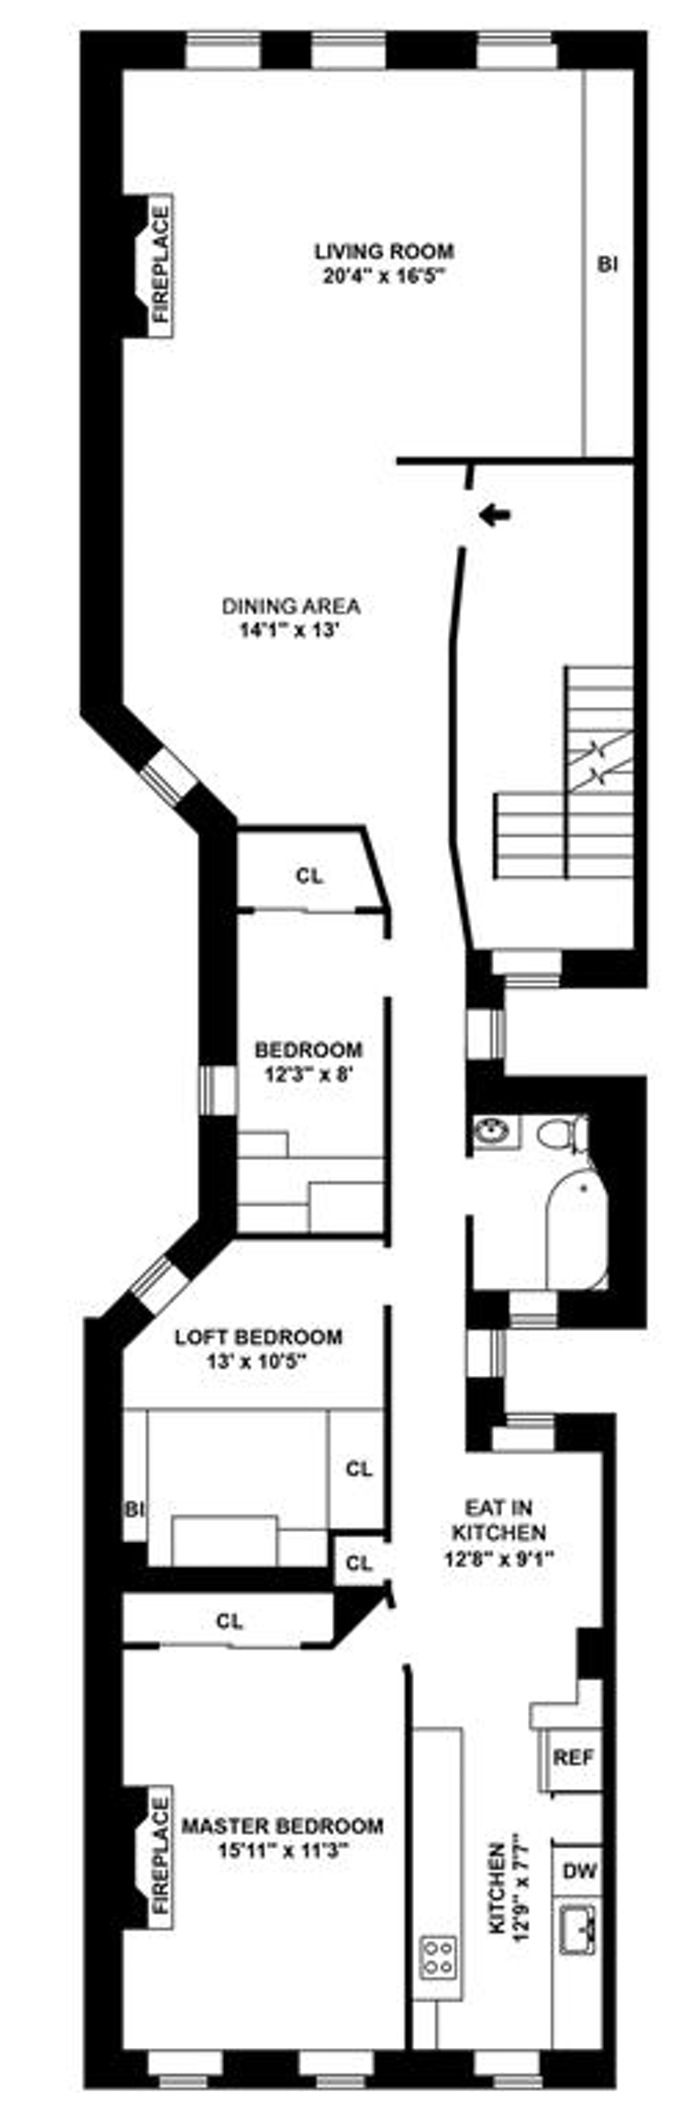 Floorplan for 106 Waverly Place